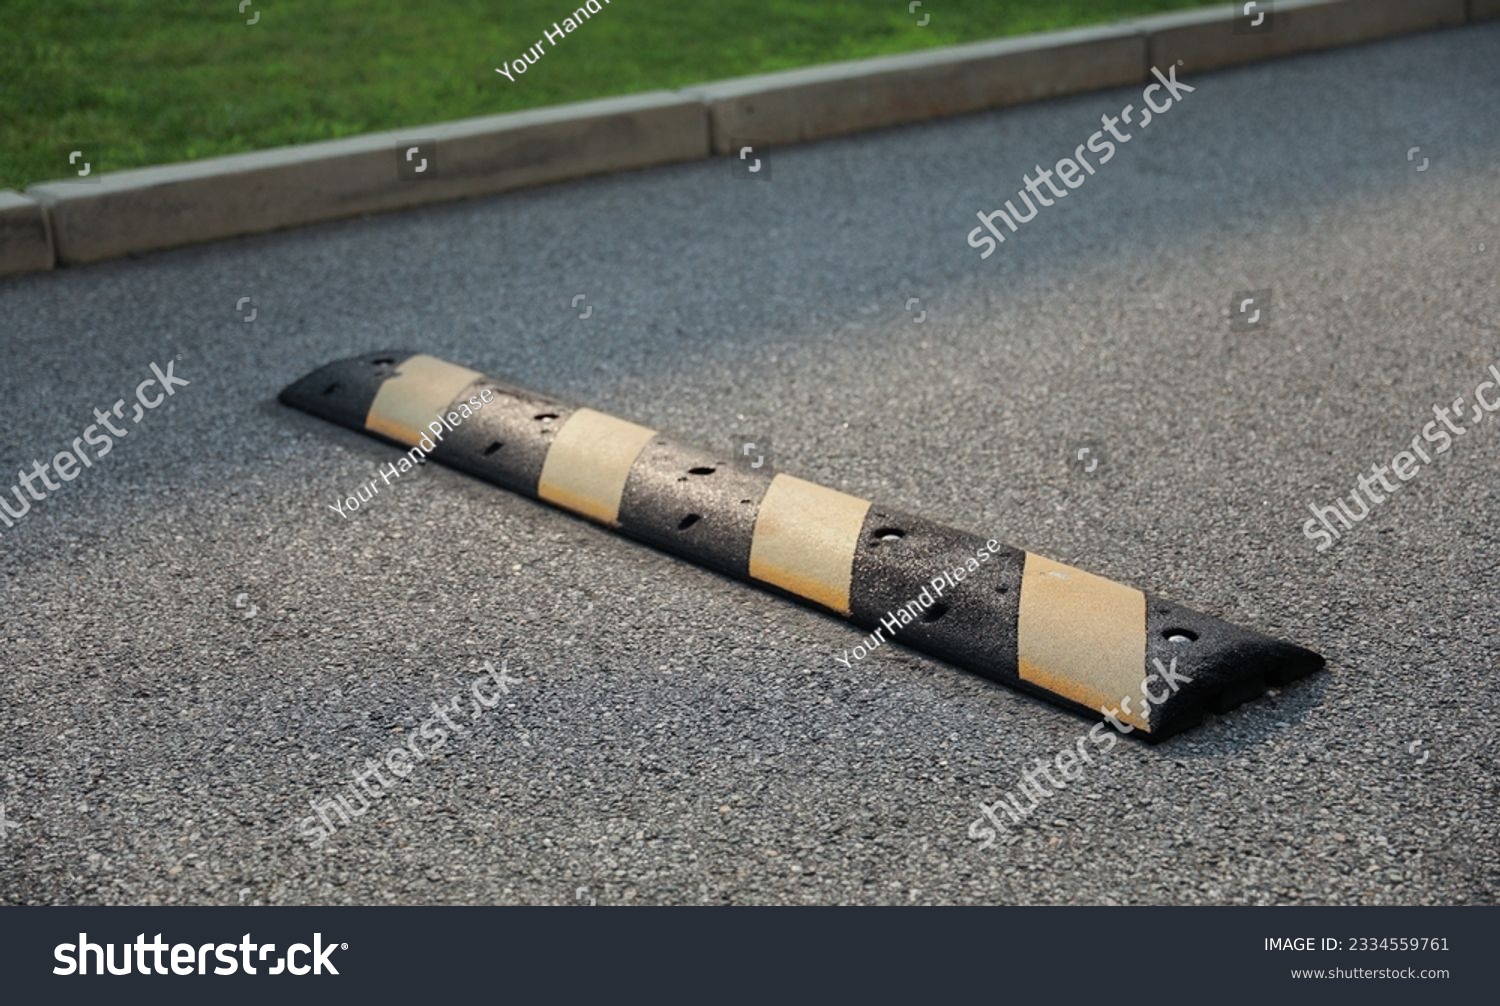 speed bump on a street symbolizes traffic control, caution, and slowing down for safety. It represents the need to be vigilant and considerate of others #2334559761